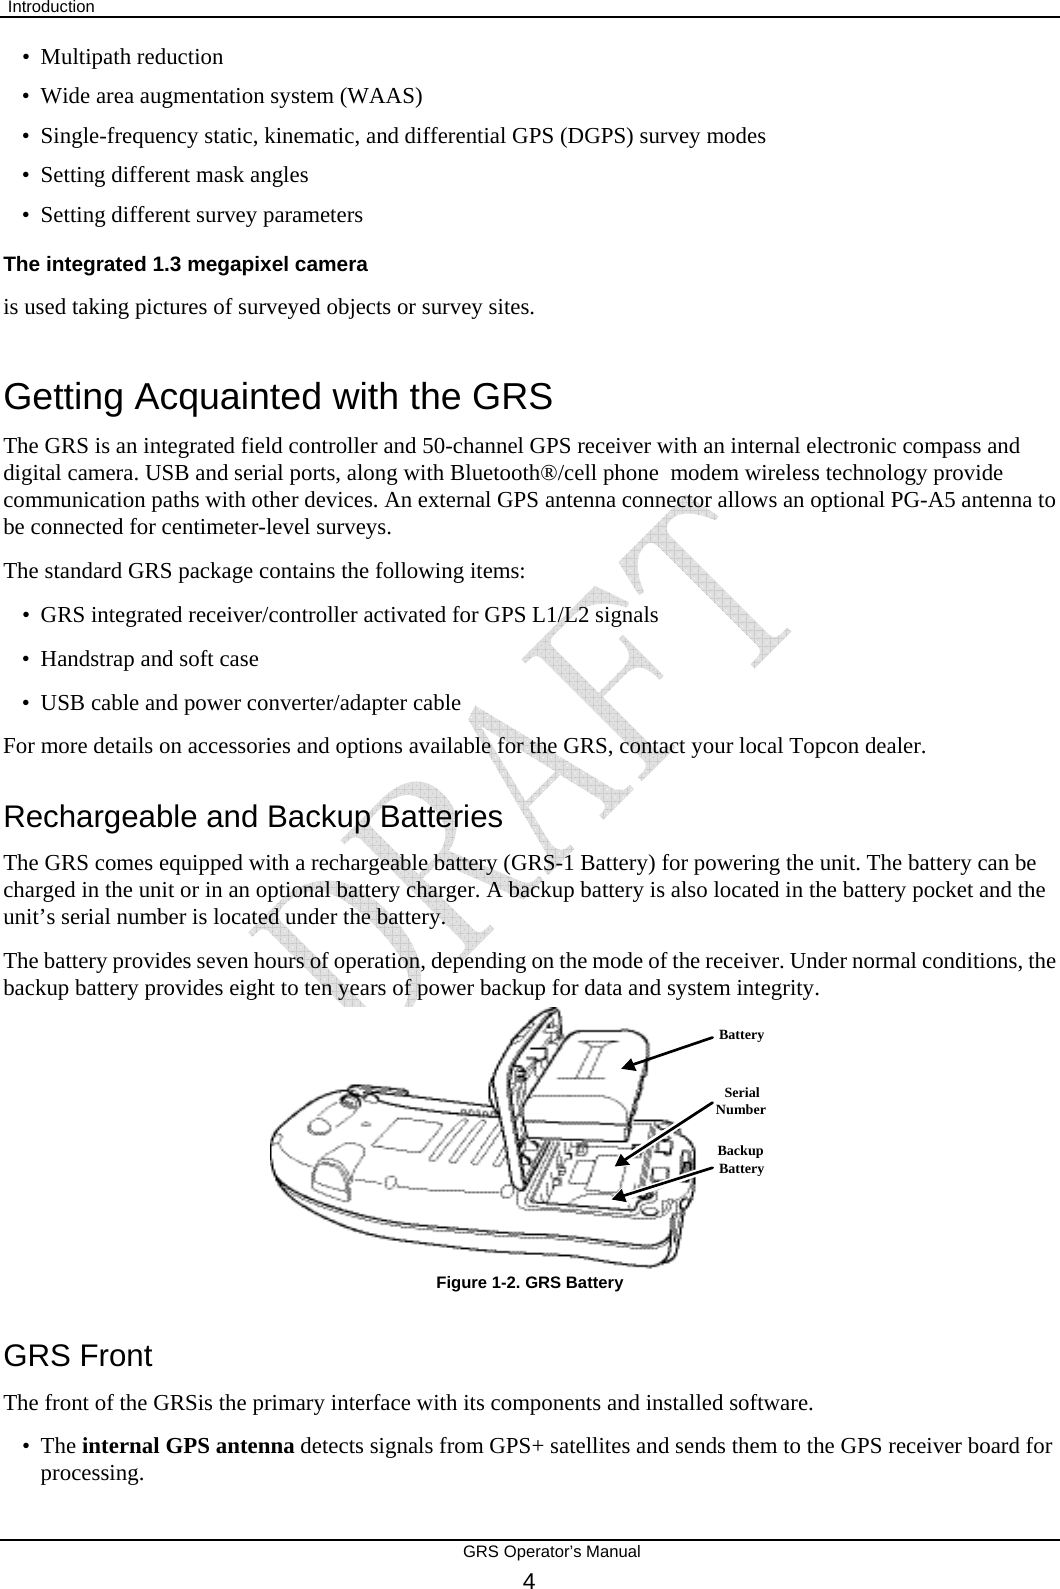  Introduction       GRS Operator’s Manual 4 BackupBatteryBatterySerialNumber• Multipath reduction • Wide area augmentation system (WAAS) • Single-frequency static, kinematic, and differential GPS (DGPS) survey modes • Setting different mask angles • Setting different survey parameters The integrated 1.3 megapixel camera is used taking pictures of surveyed objects or survey sites. Getting Acquainted with the GRS The GRS is an integrated field controller and 50-channel GPS receiver with an internal electronic compass and digital camera. USB and serial ports, along with Bluetooth®/cell phone  modem wireless technology provide communication paths with other devices. An external GPS antenna connector allows an optional PG-A5 antenna to be connected for centimeter-level surveys. The standard GRS package contains the following items: • GRS integrated receiver/controller activated for GPS L1/L2 signals • Handstrap and soft case • USB cable and power converter/adapter cable For more details on accessories and options available for the GRS, contact your local Topcon dealer. Rechargeable and Backup Batteries The GRS comes equipped with a rechargeable battery (GRS-1 Battery) for powering the unit. The battery can be charged in the unit or in an optional battery charger. A backup battery is also located in the battery pocket and the unit’s serial number is located under the battery. The battery provides seven hours of operation, depending on the mode of the receiver. Under normal conditions, the backup battery provides eight to ten years of power backup for data and system integrity.        Figure 1-2. GRS Battery GRS Front The front of the GRSis the primary interface with its components and installed software. • The internal GPS antenna detects signals from GPS+ satellites and sends them to the GPS receiver board for processing. 